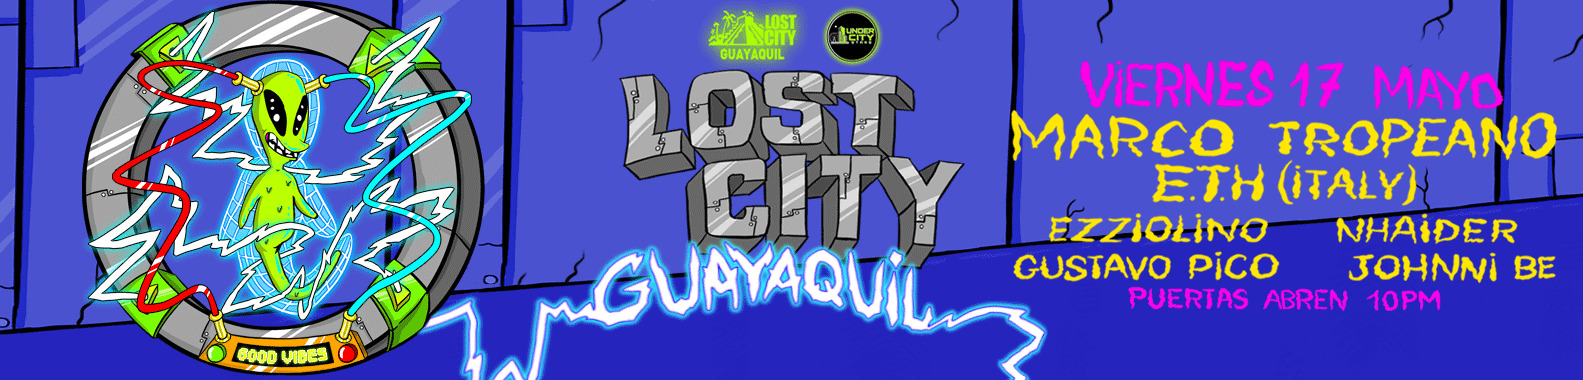 Lost City Guayaquil ft. Marco Tropeano E.T.H Italy (+18)